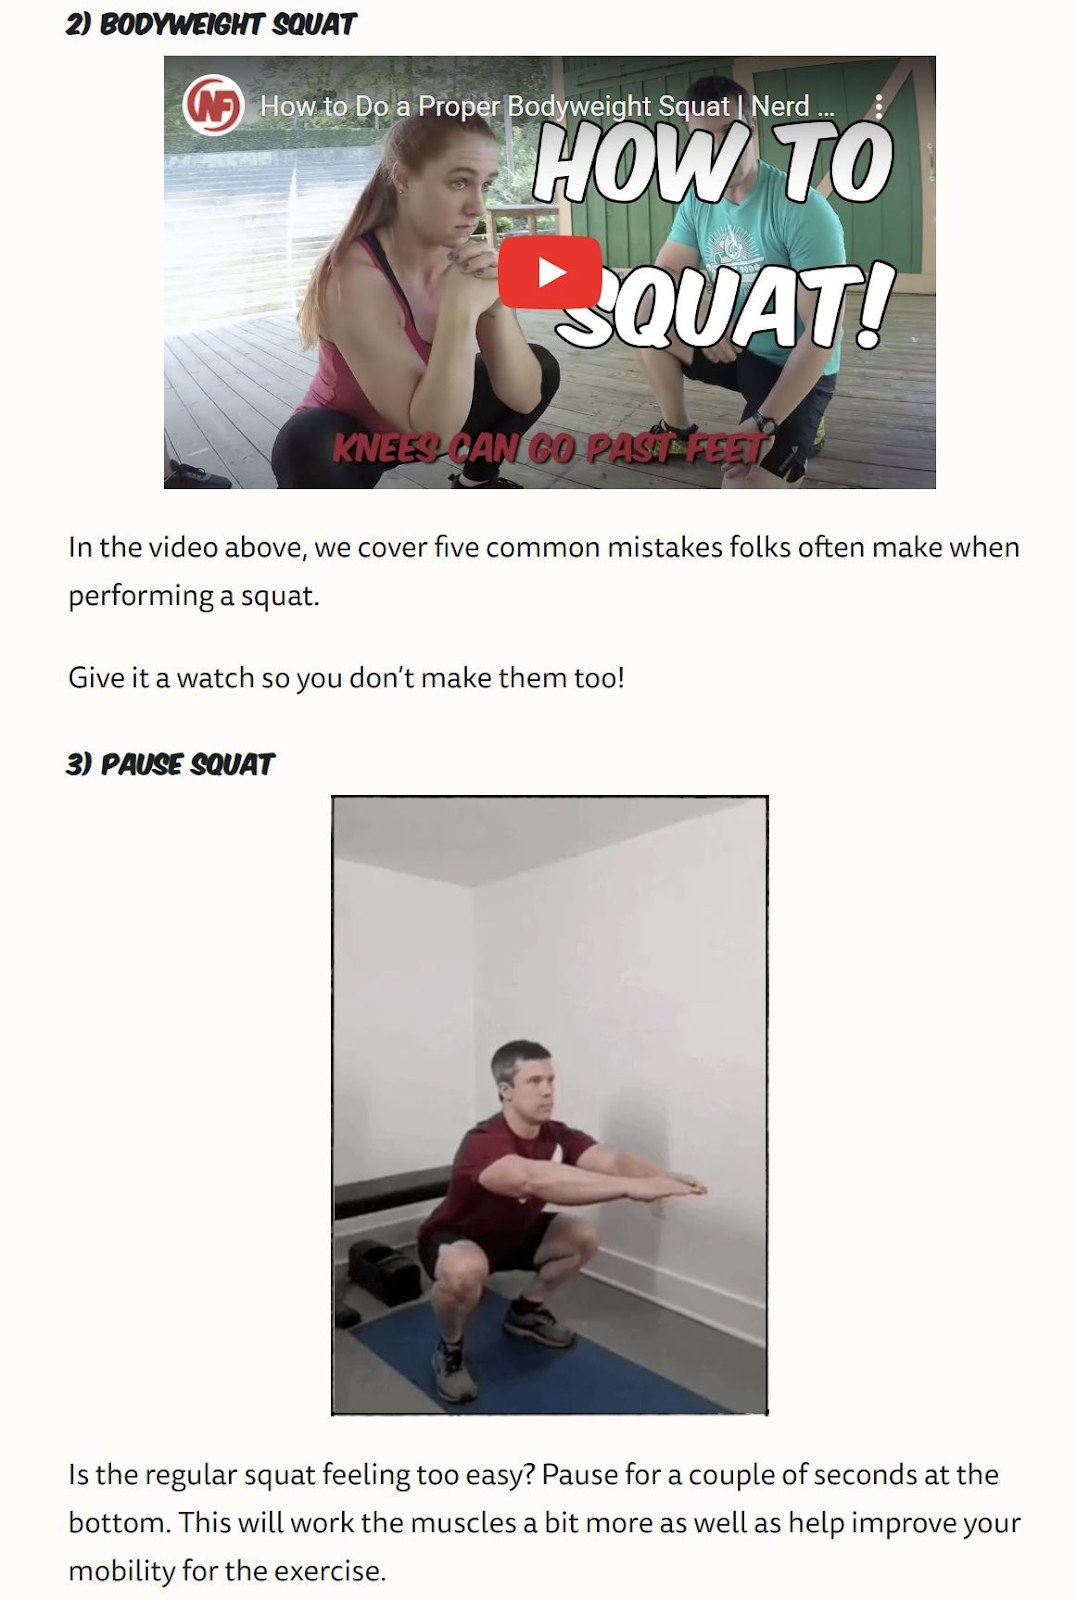 Nerd Fitness's article using video and GIFs to demonstrate workouts